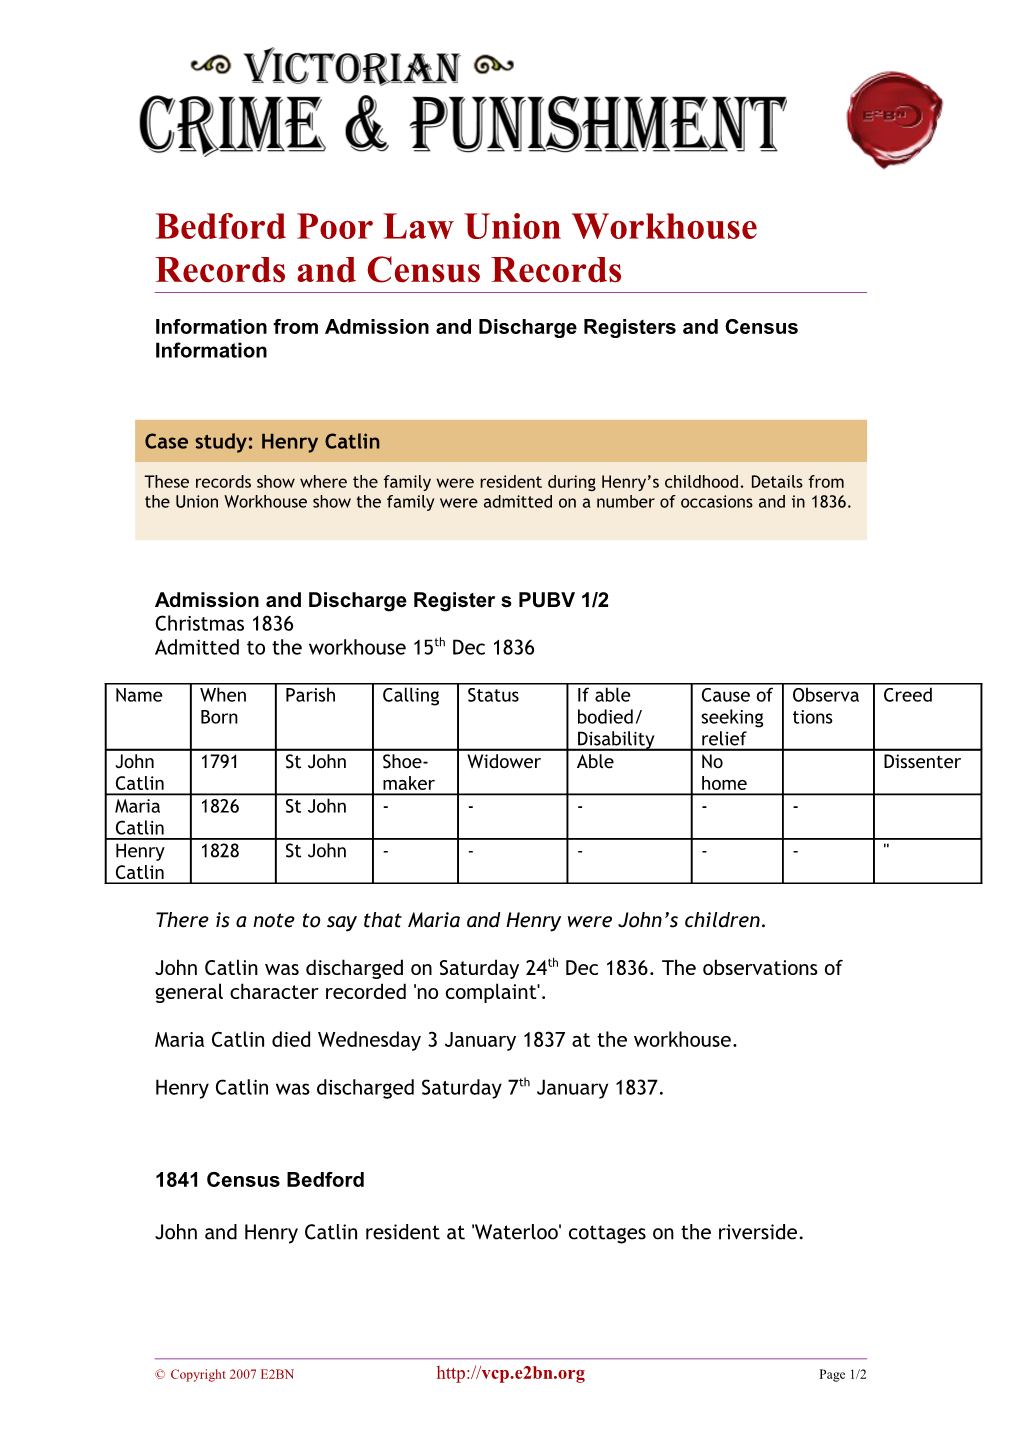 Bedford Poor Law Union Workhouse Records and Census Records